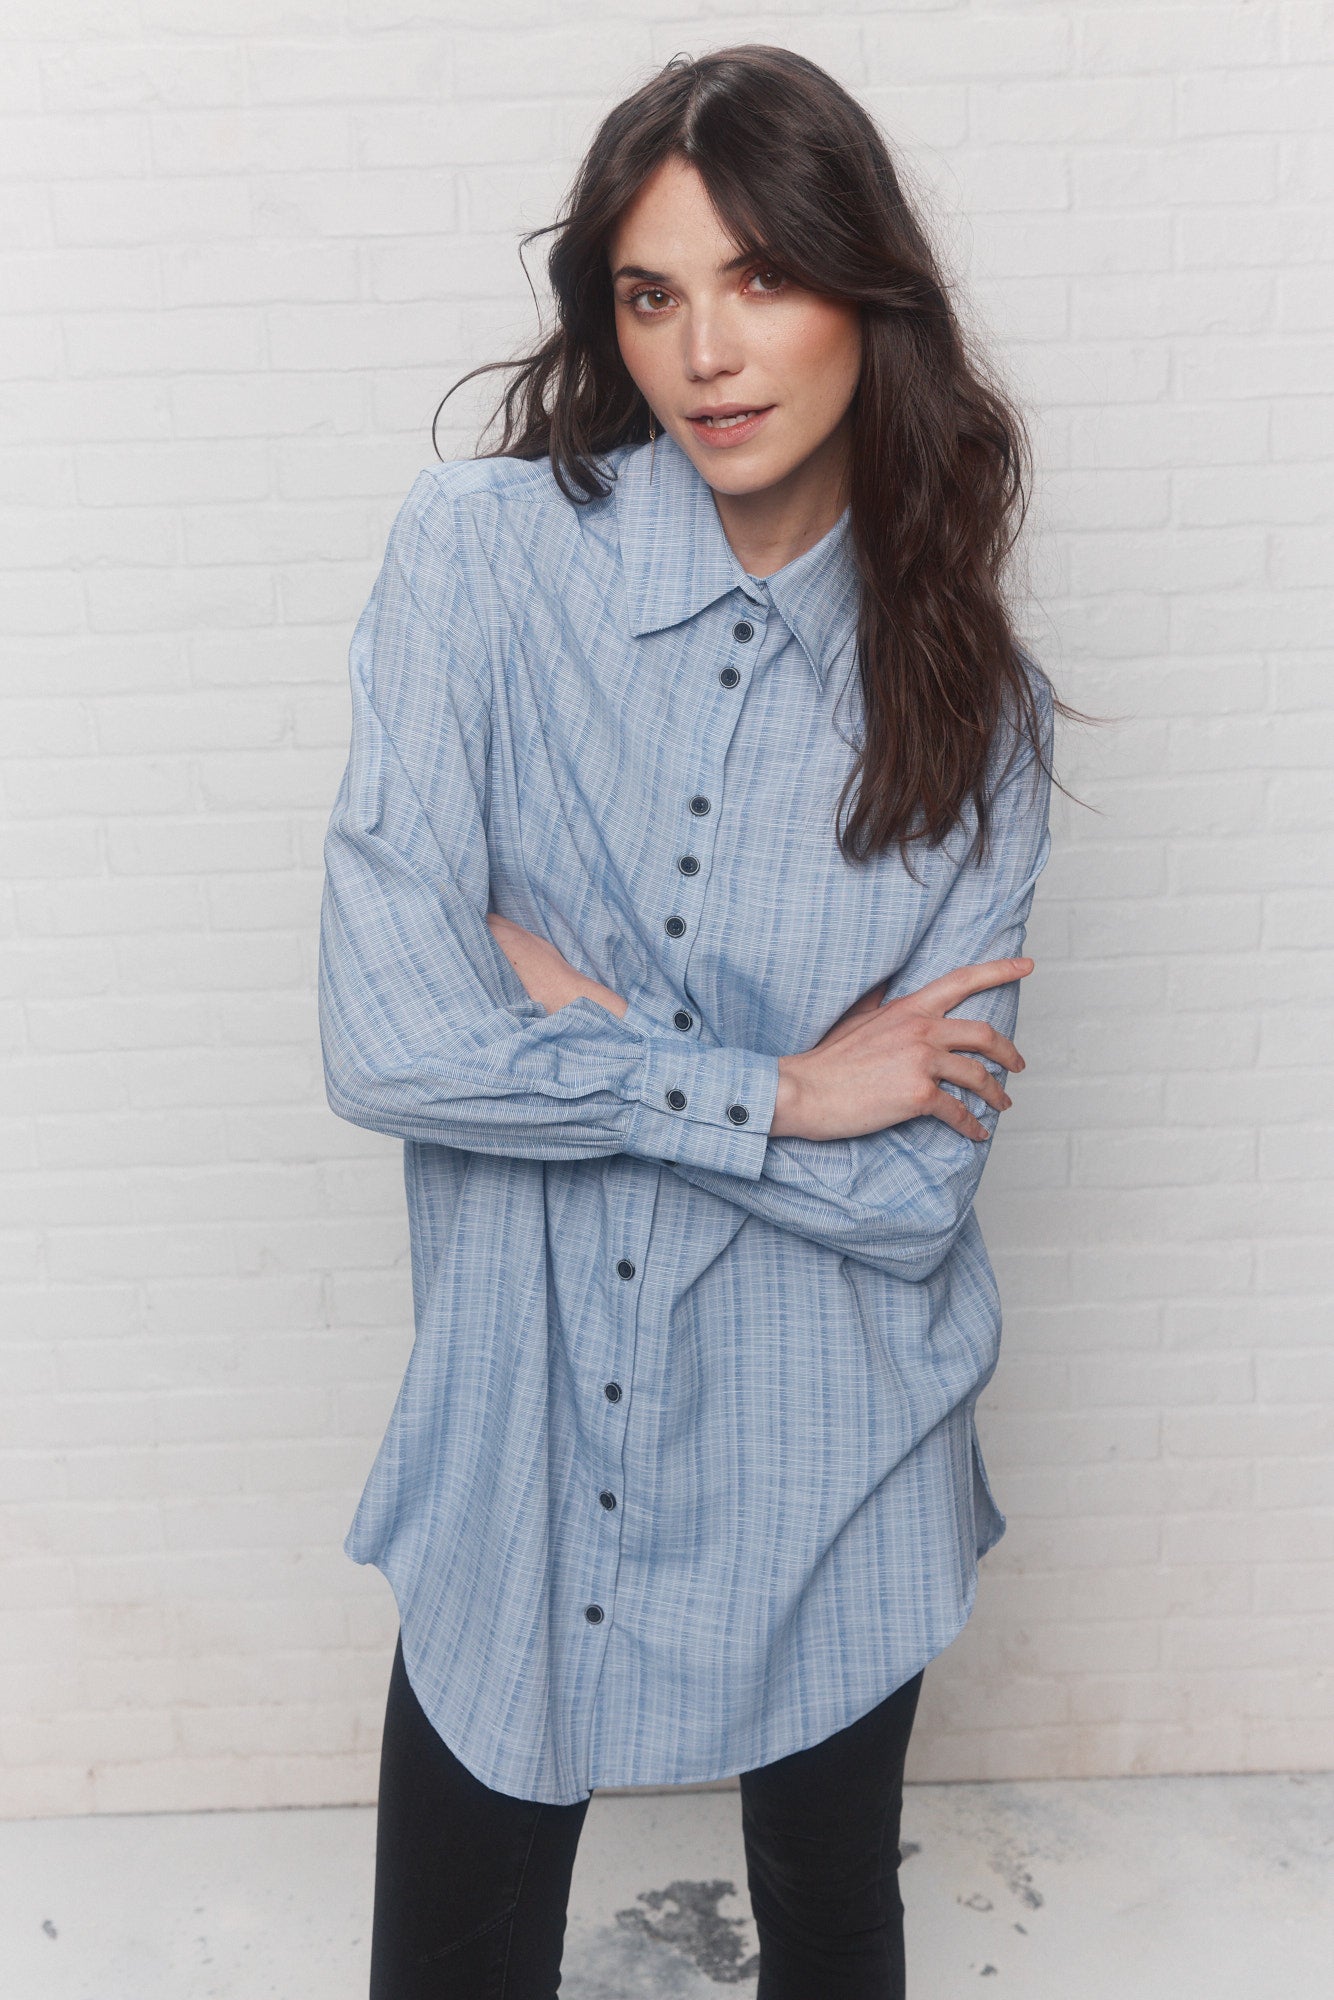 Long blue shirt with lined pattern | Douglas